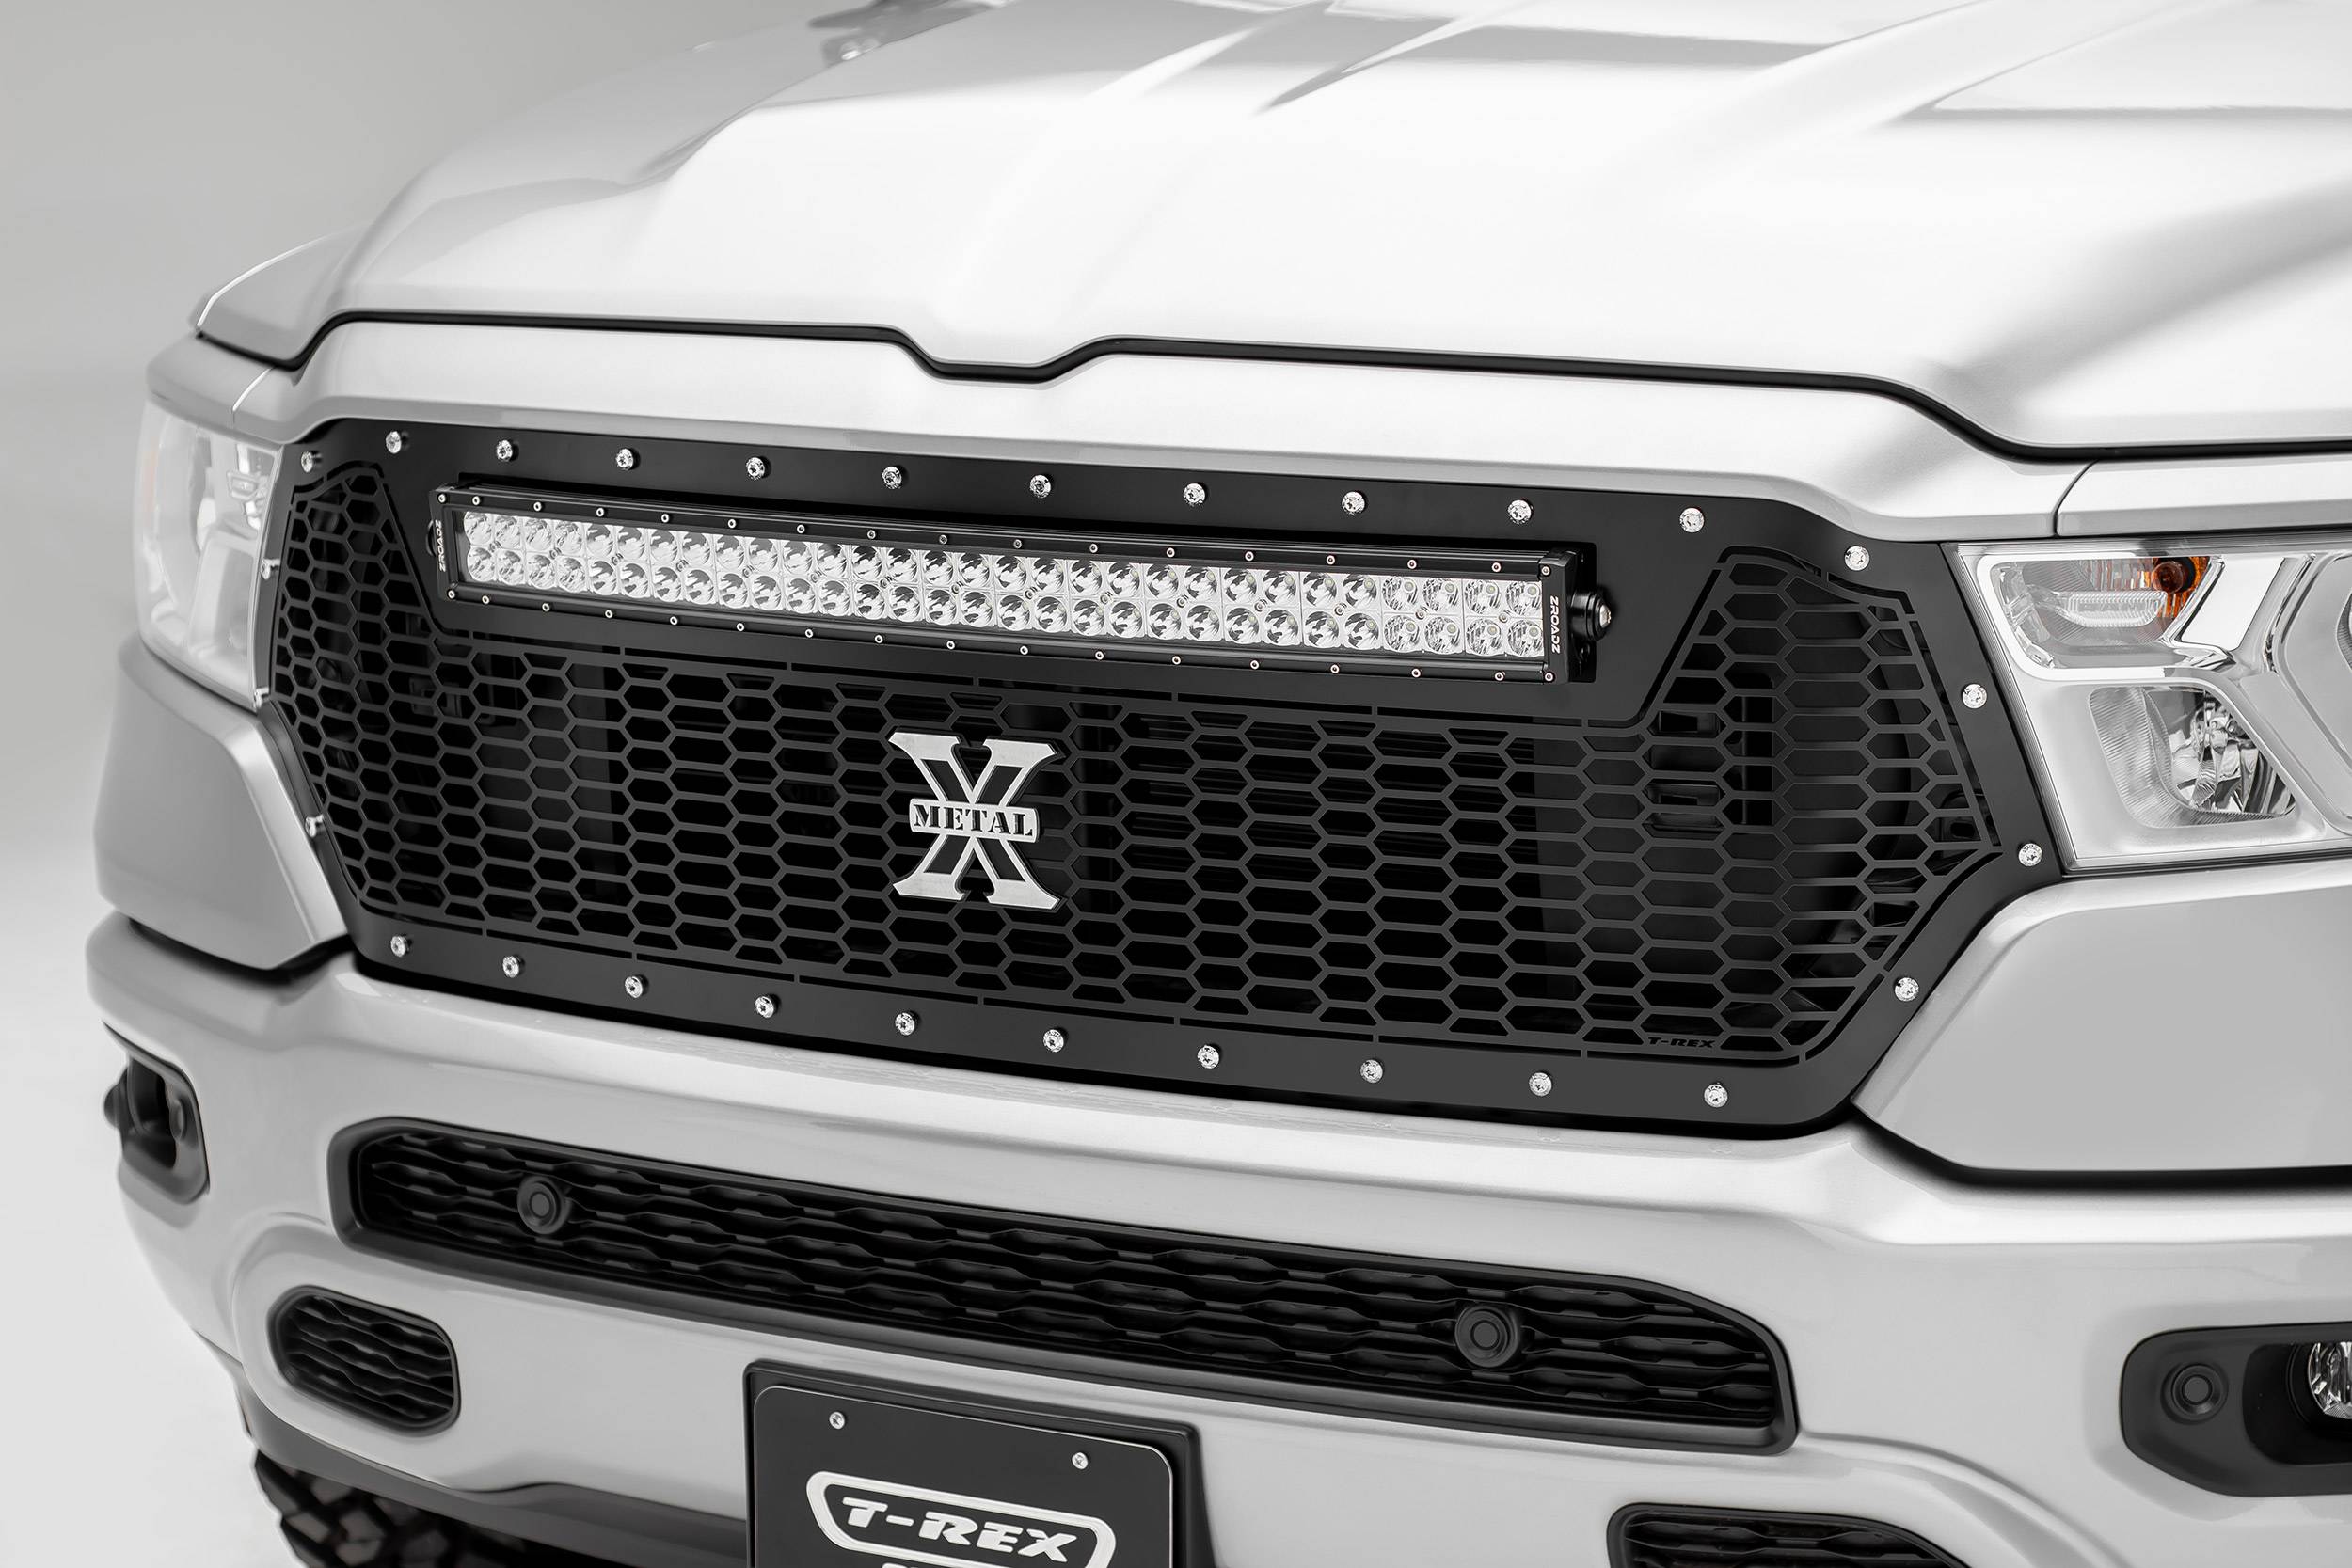 T-REX Grilles - 2019-2021 Ram 1500 Laramie, Lone Star, Big Horn, Tradesman Laser Torch Grille, Black, 1 Pc, Replacement, Chrome Studs, Incl. (1) 30" LED - Part # 7314651